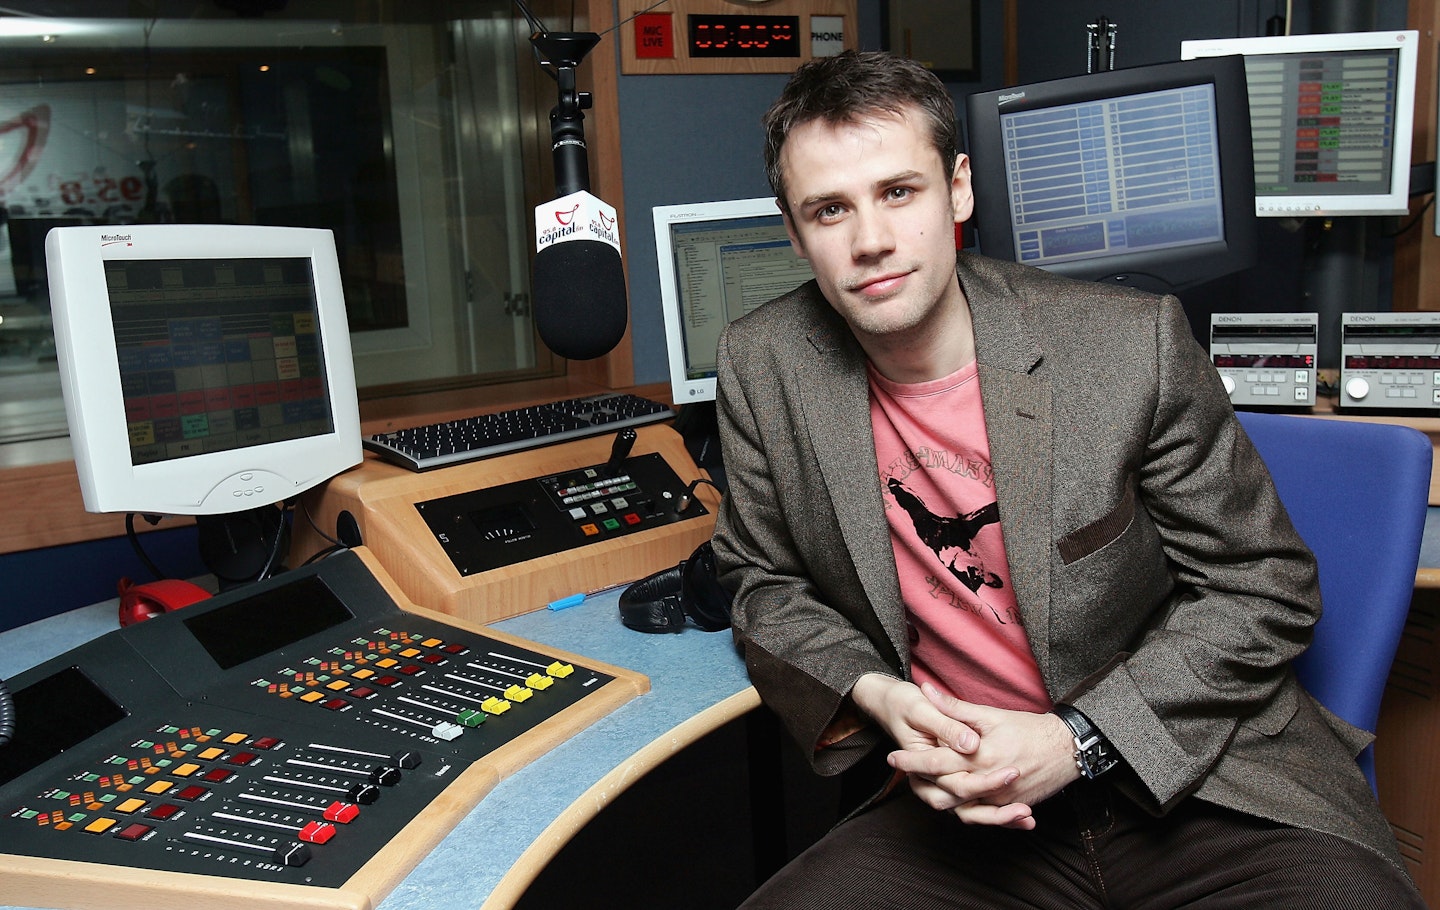 Richard Bacon poses at a photocall to announce his new role as host of Capital FM's Drive Time at Capital FM Leicester Square, shot on March 2, 2005 in London, England.